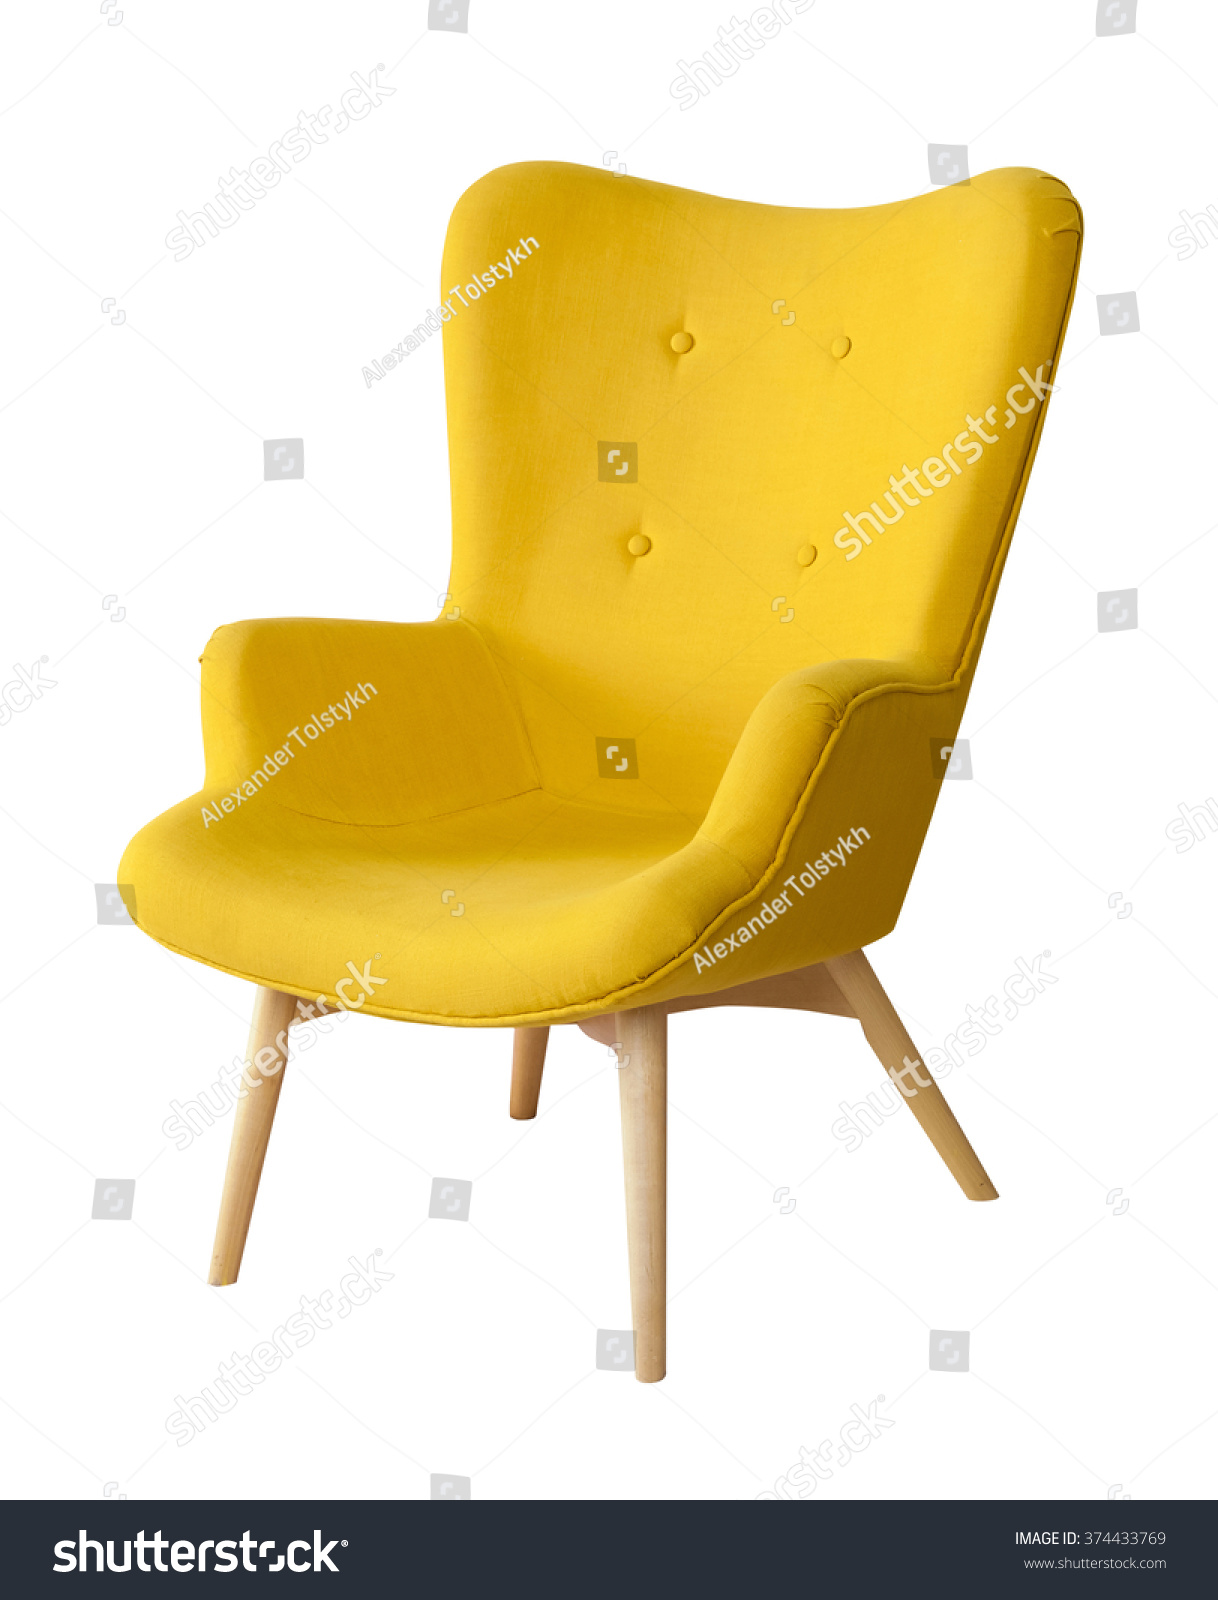 Yellow modern chair isolated on white background #374433769